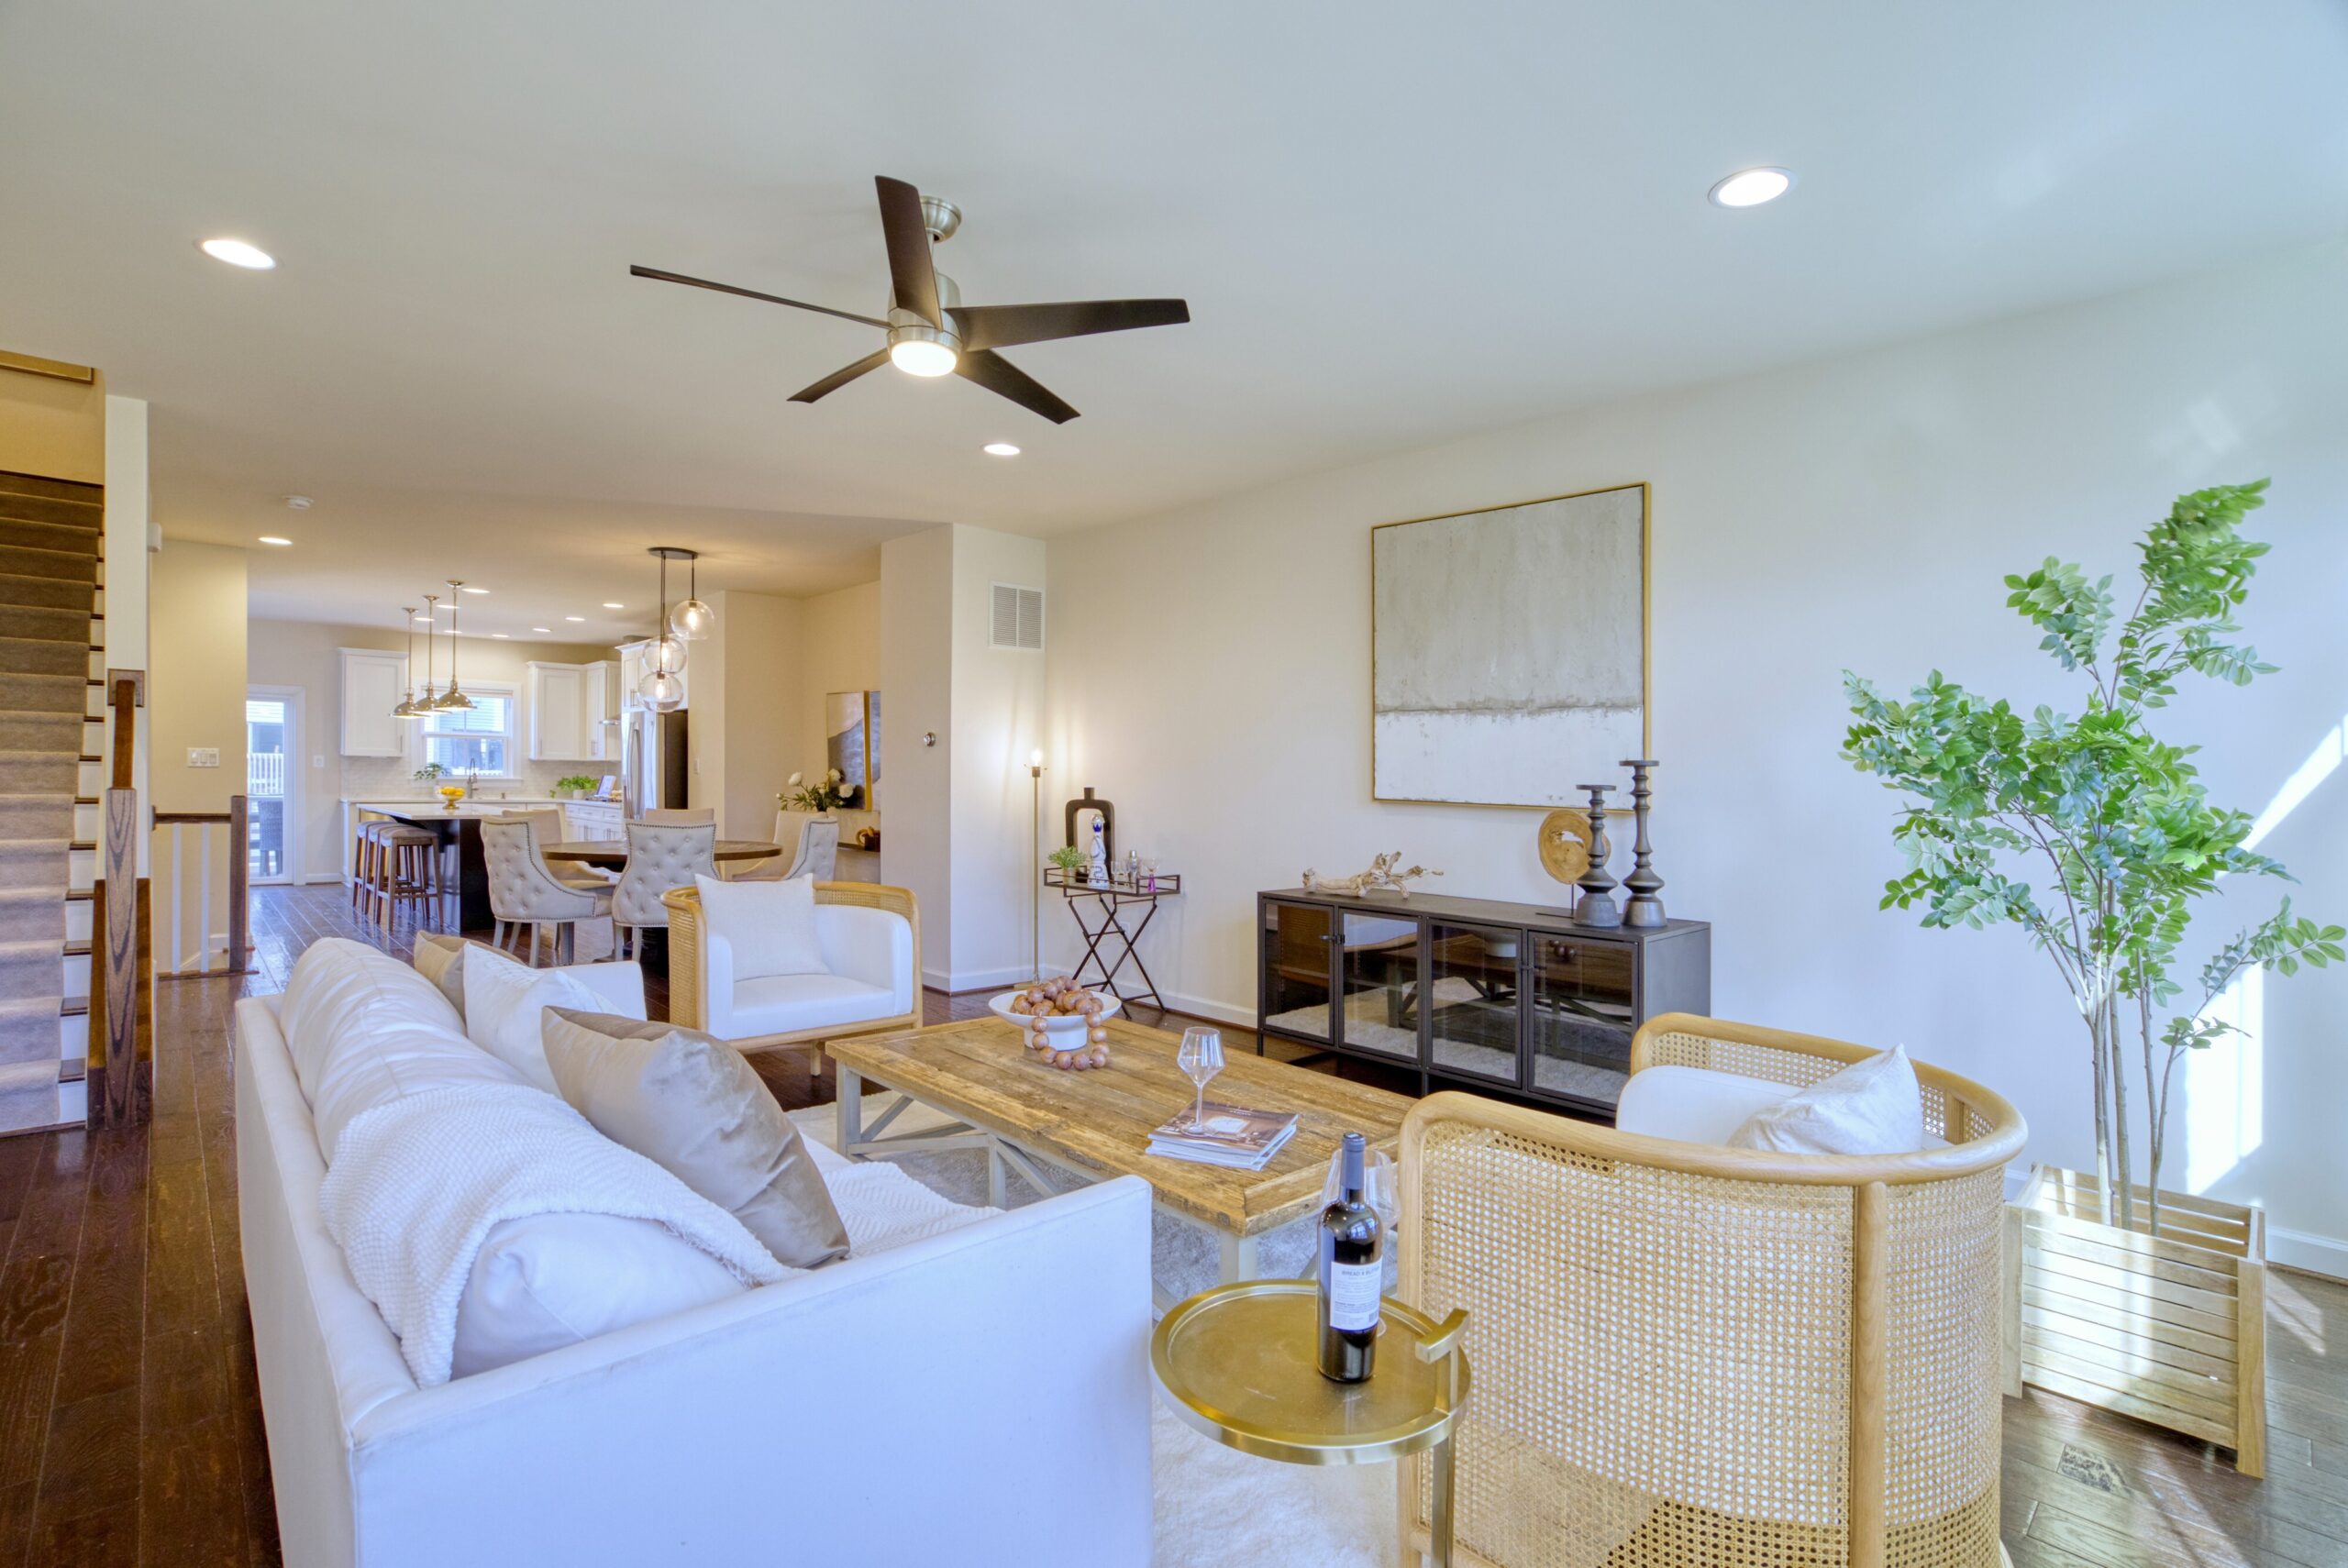 Professional interior photo of 3165 Virginia Bluebell Ct, Fairfax - showing the open living to dining space, with ceiling fan